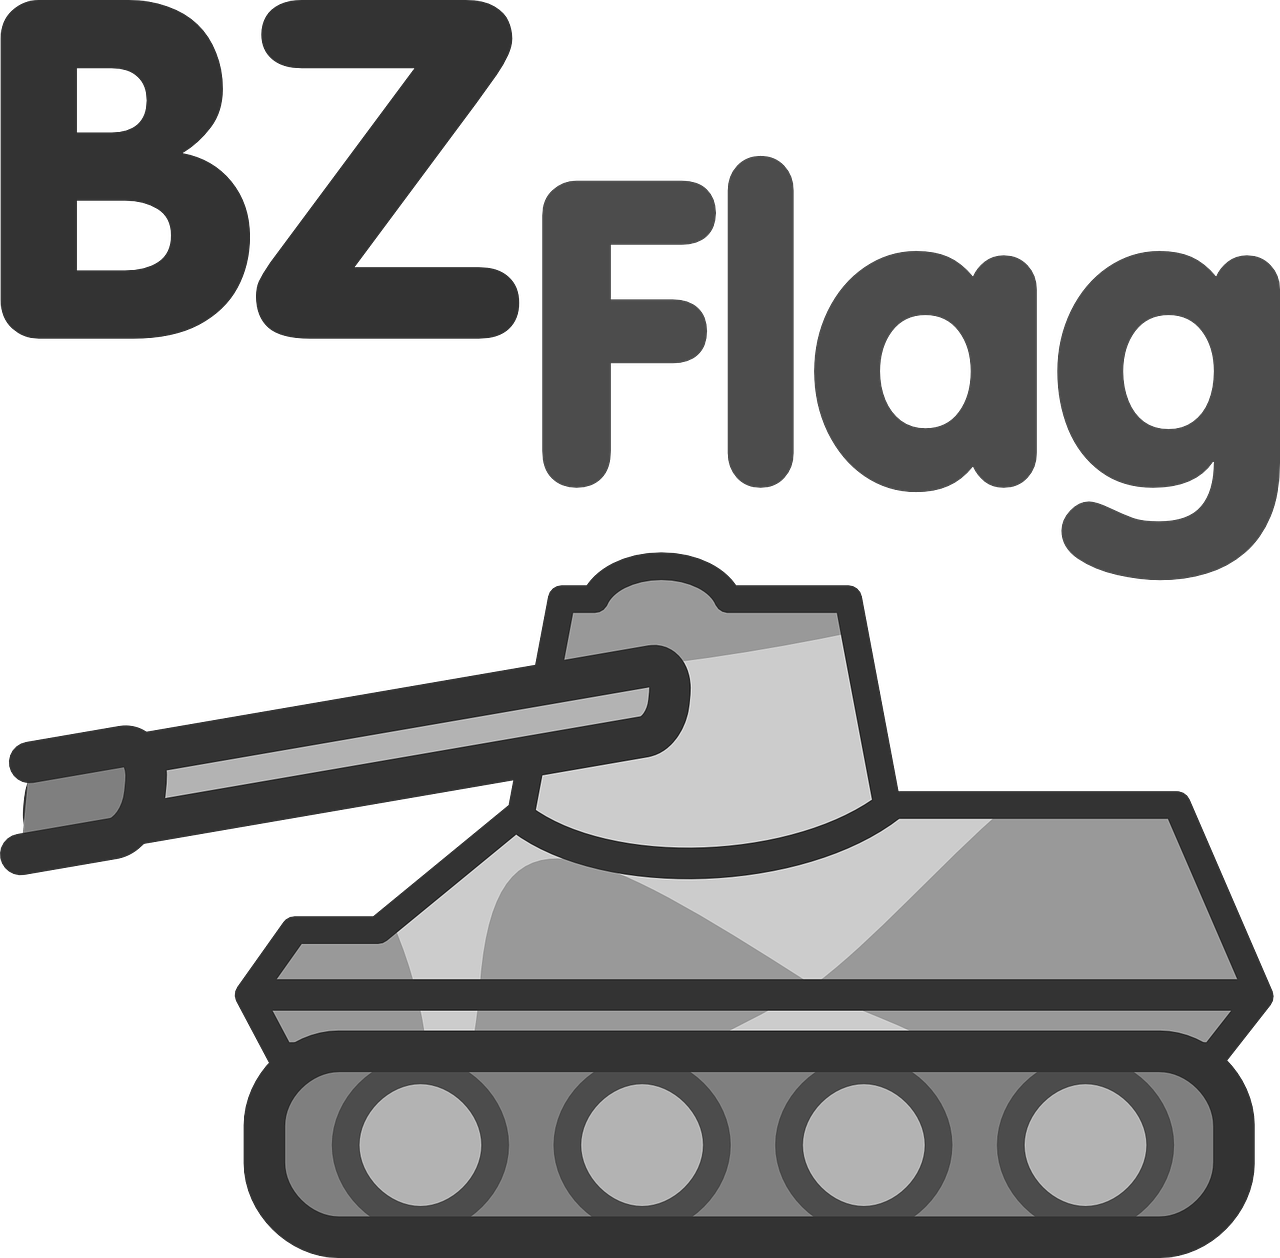 tank,flag,symbol,icon,free vector graphics,free pictures, free photos, free images, royalty free, free illustrations, public domain